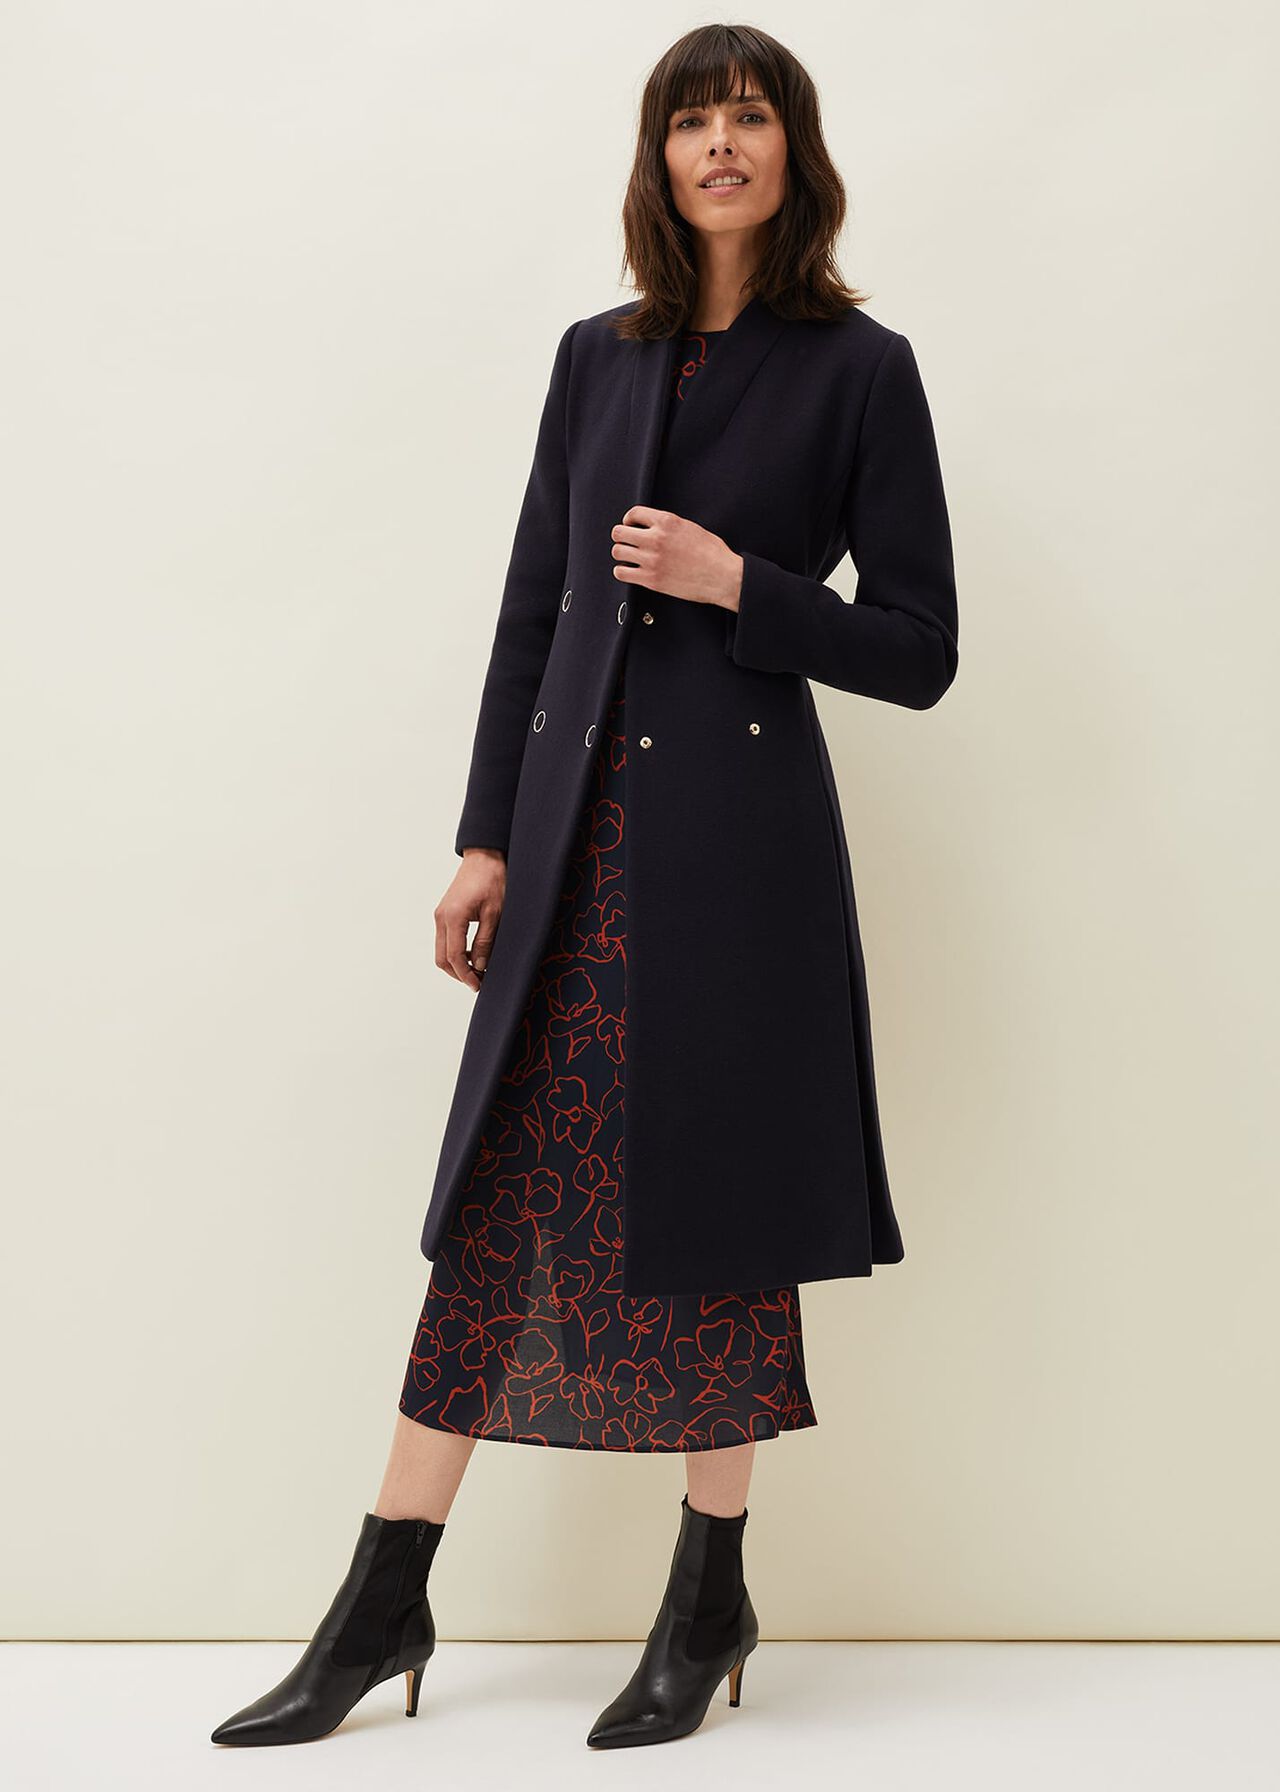 Evie-Rose Fit & Flare Wool Coat